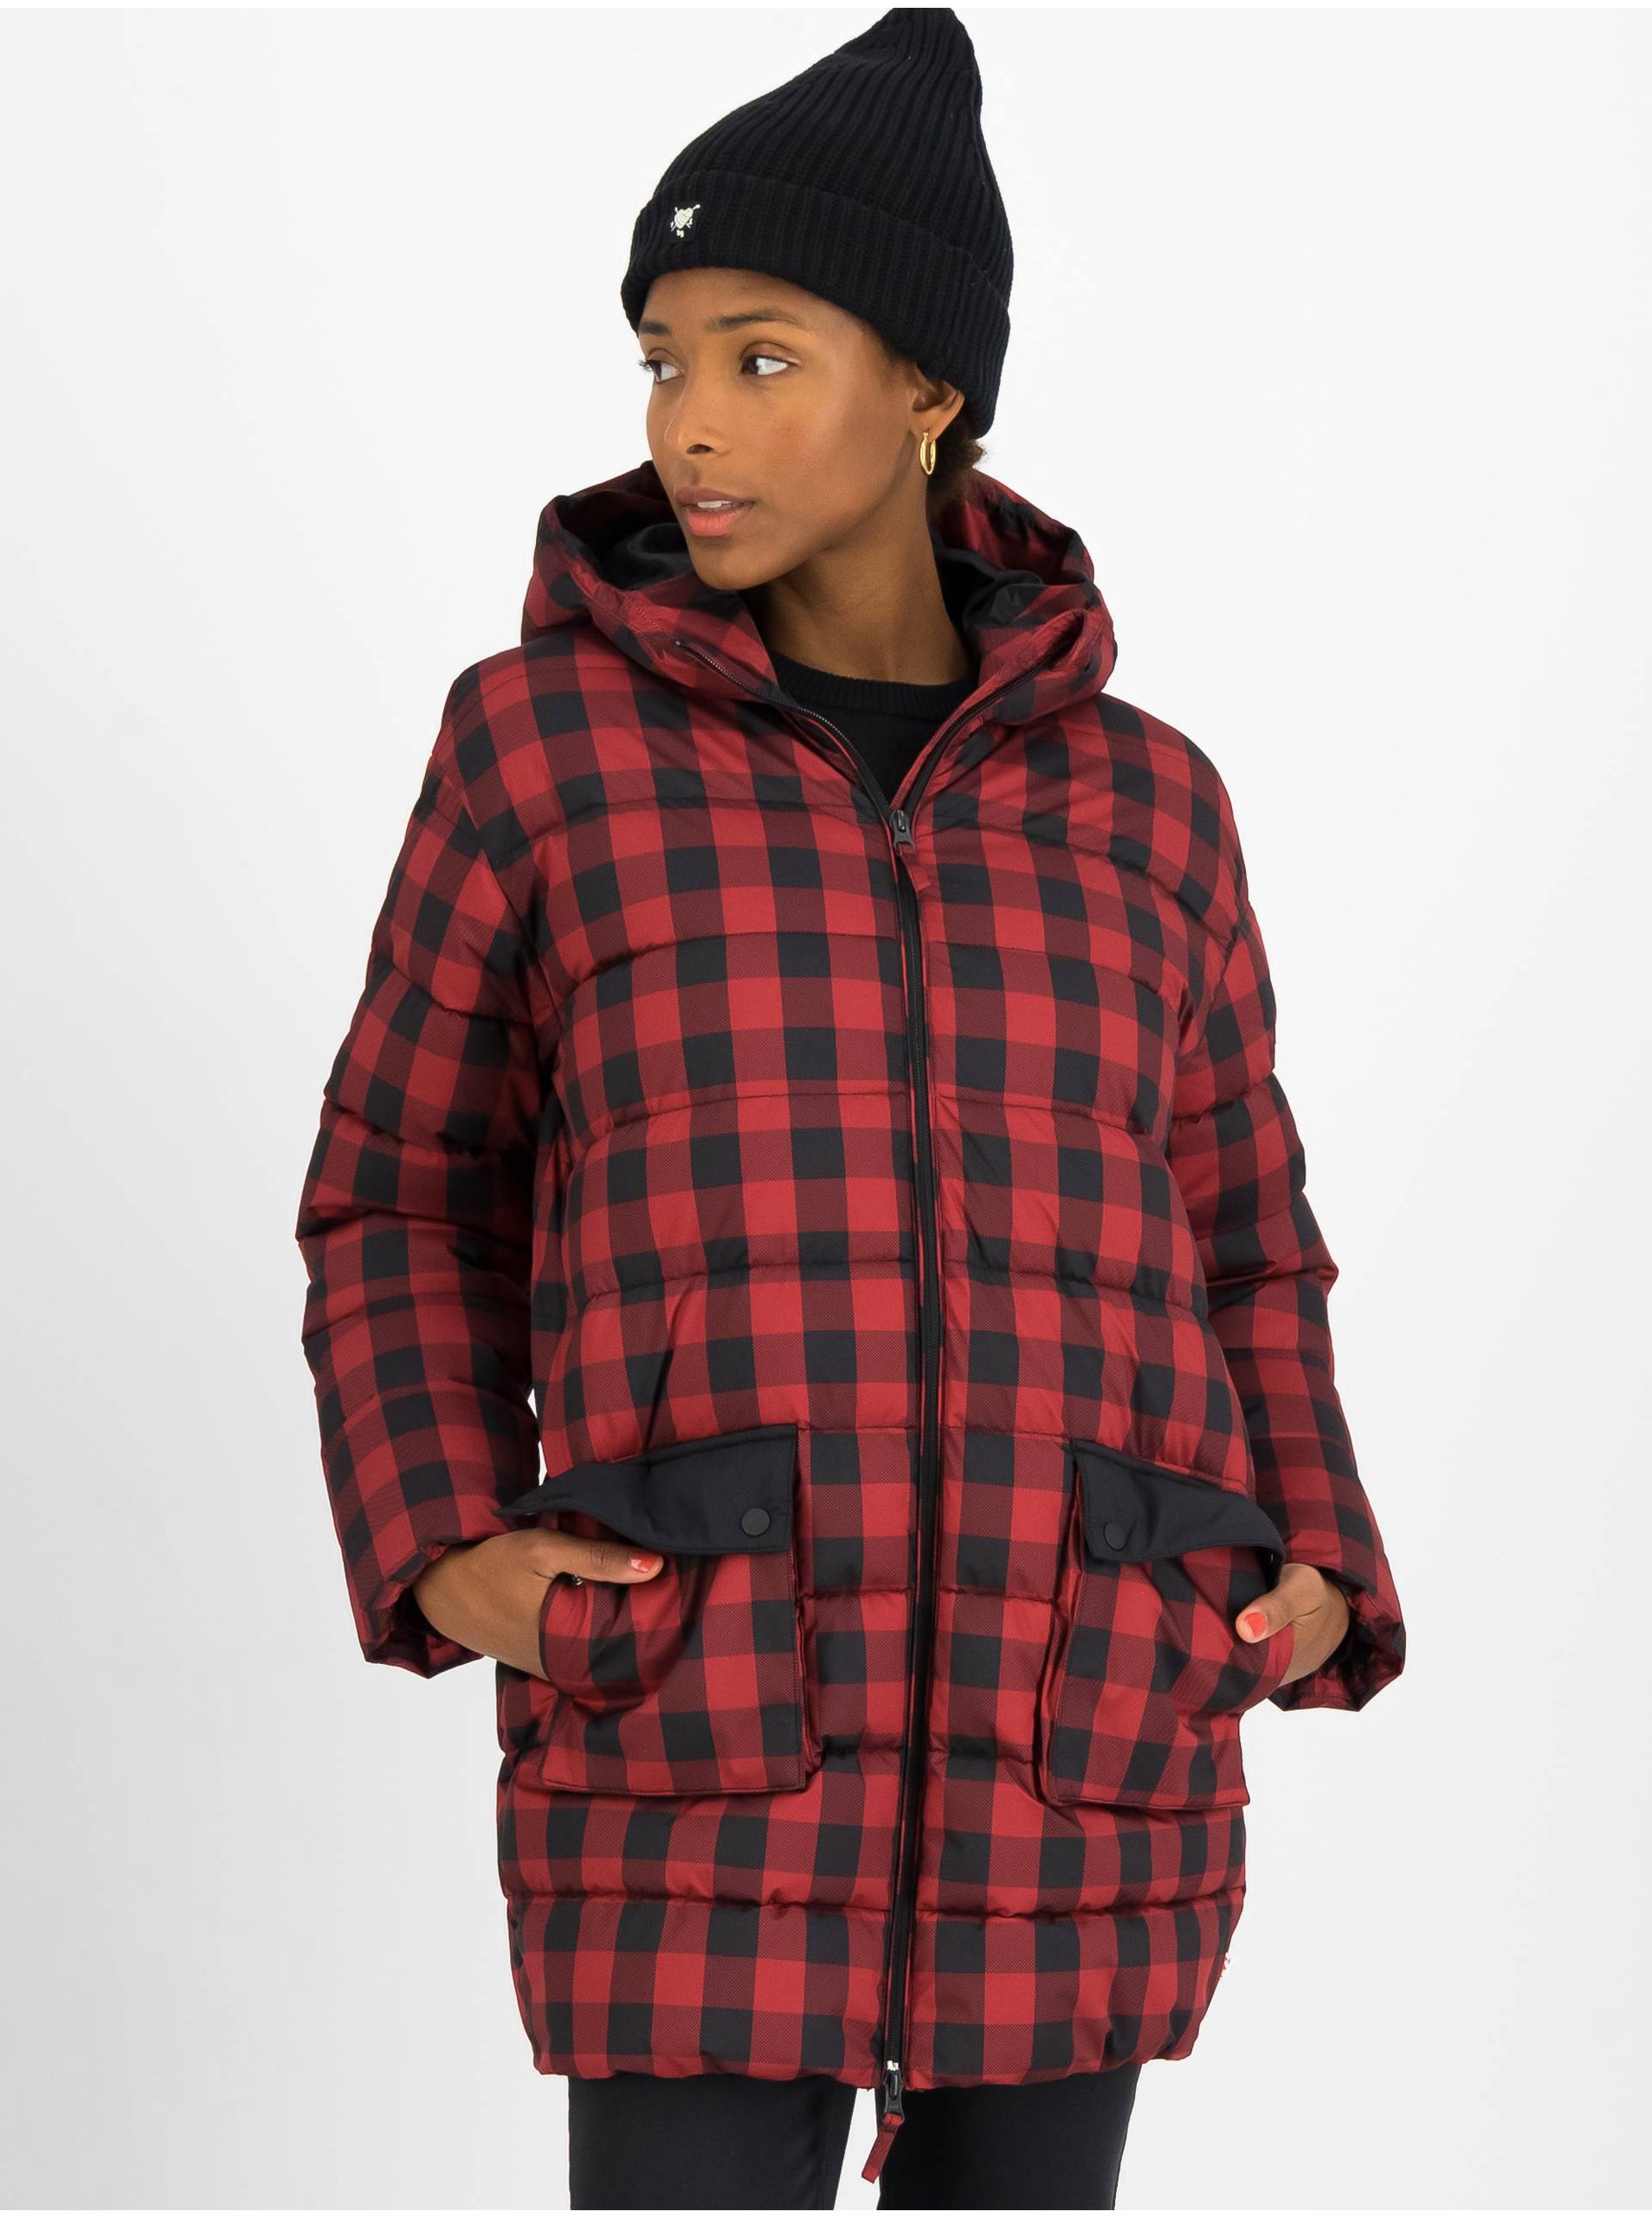 Black-red Plaid Quilted Jacket Blutsgeschwister - Women